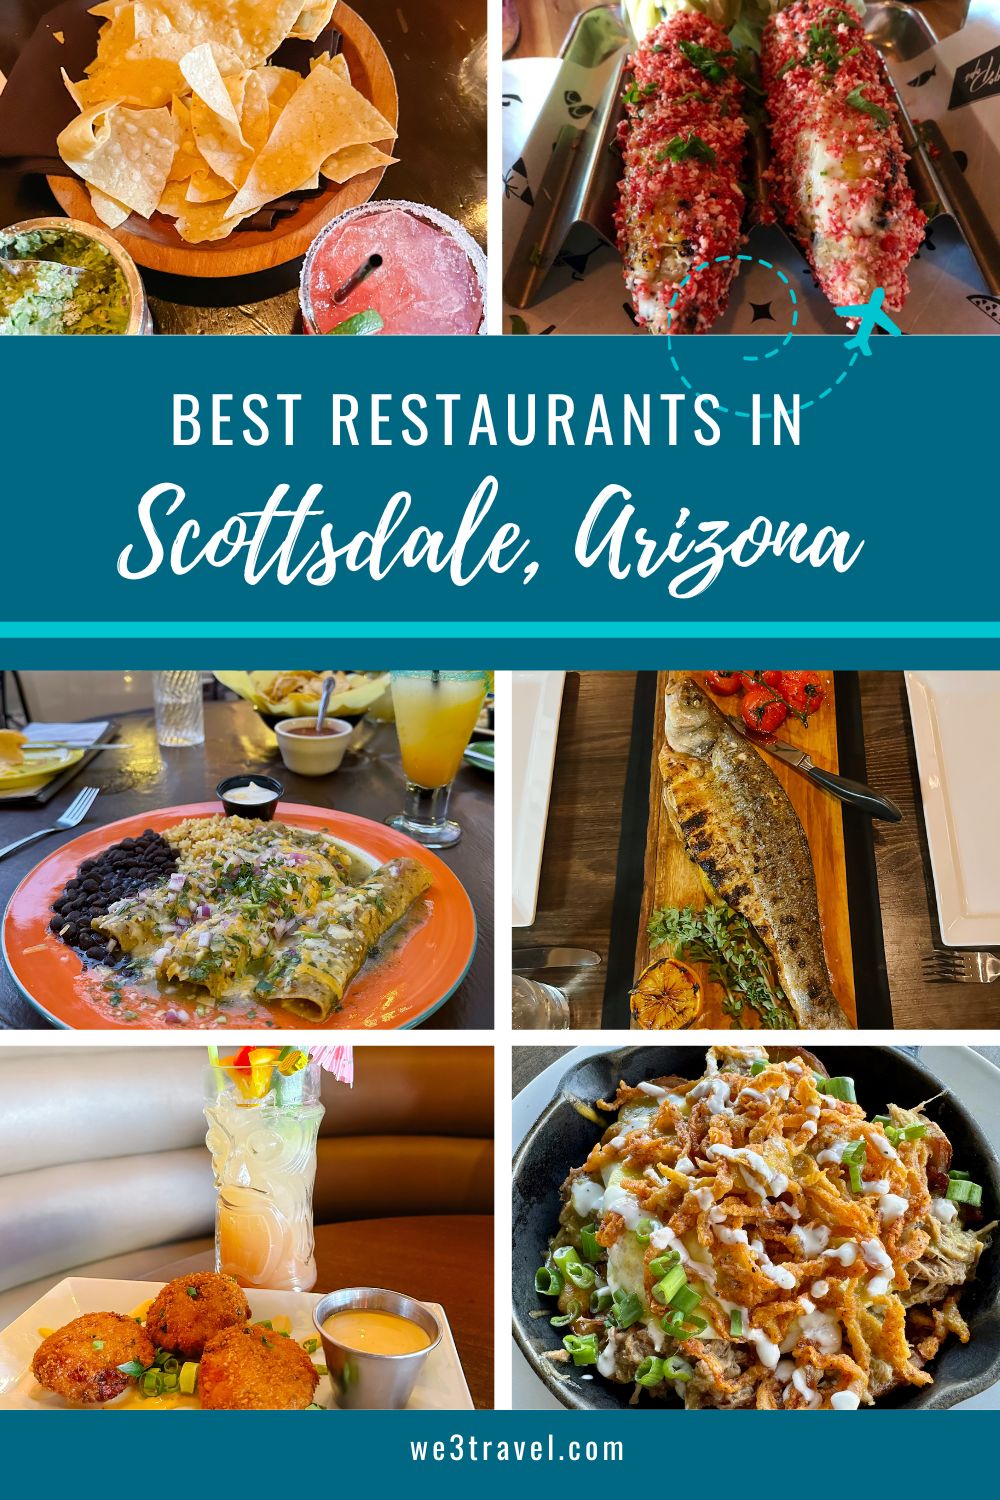 We've got you covered with these best downtown Scottsdale restaurants, including Old Town Scottsdale restaurants, the best brunch in Scottsdale, Mexican, Italian, and even a tiki restaurant!